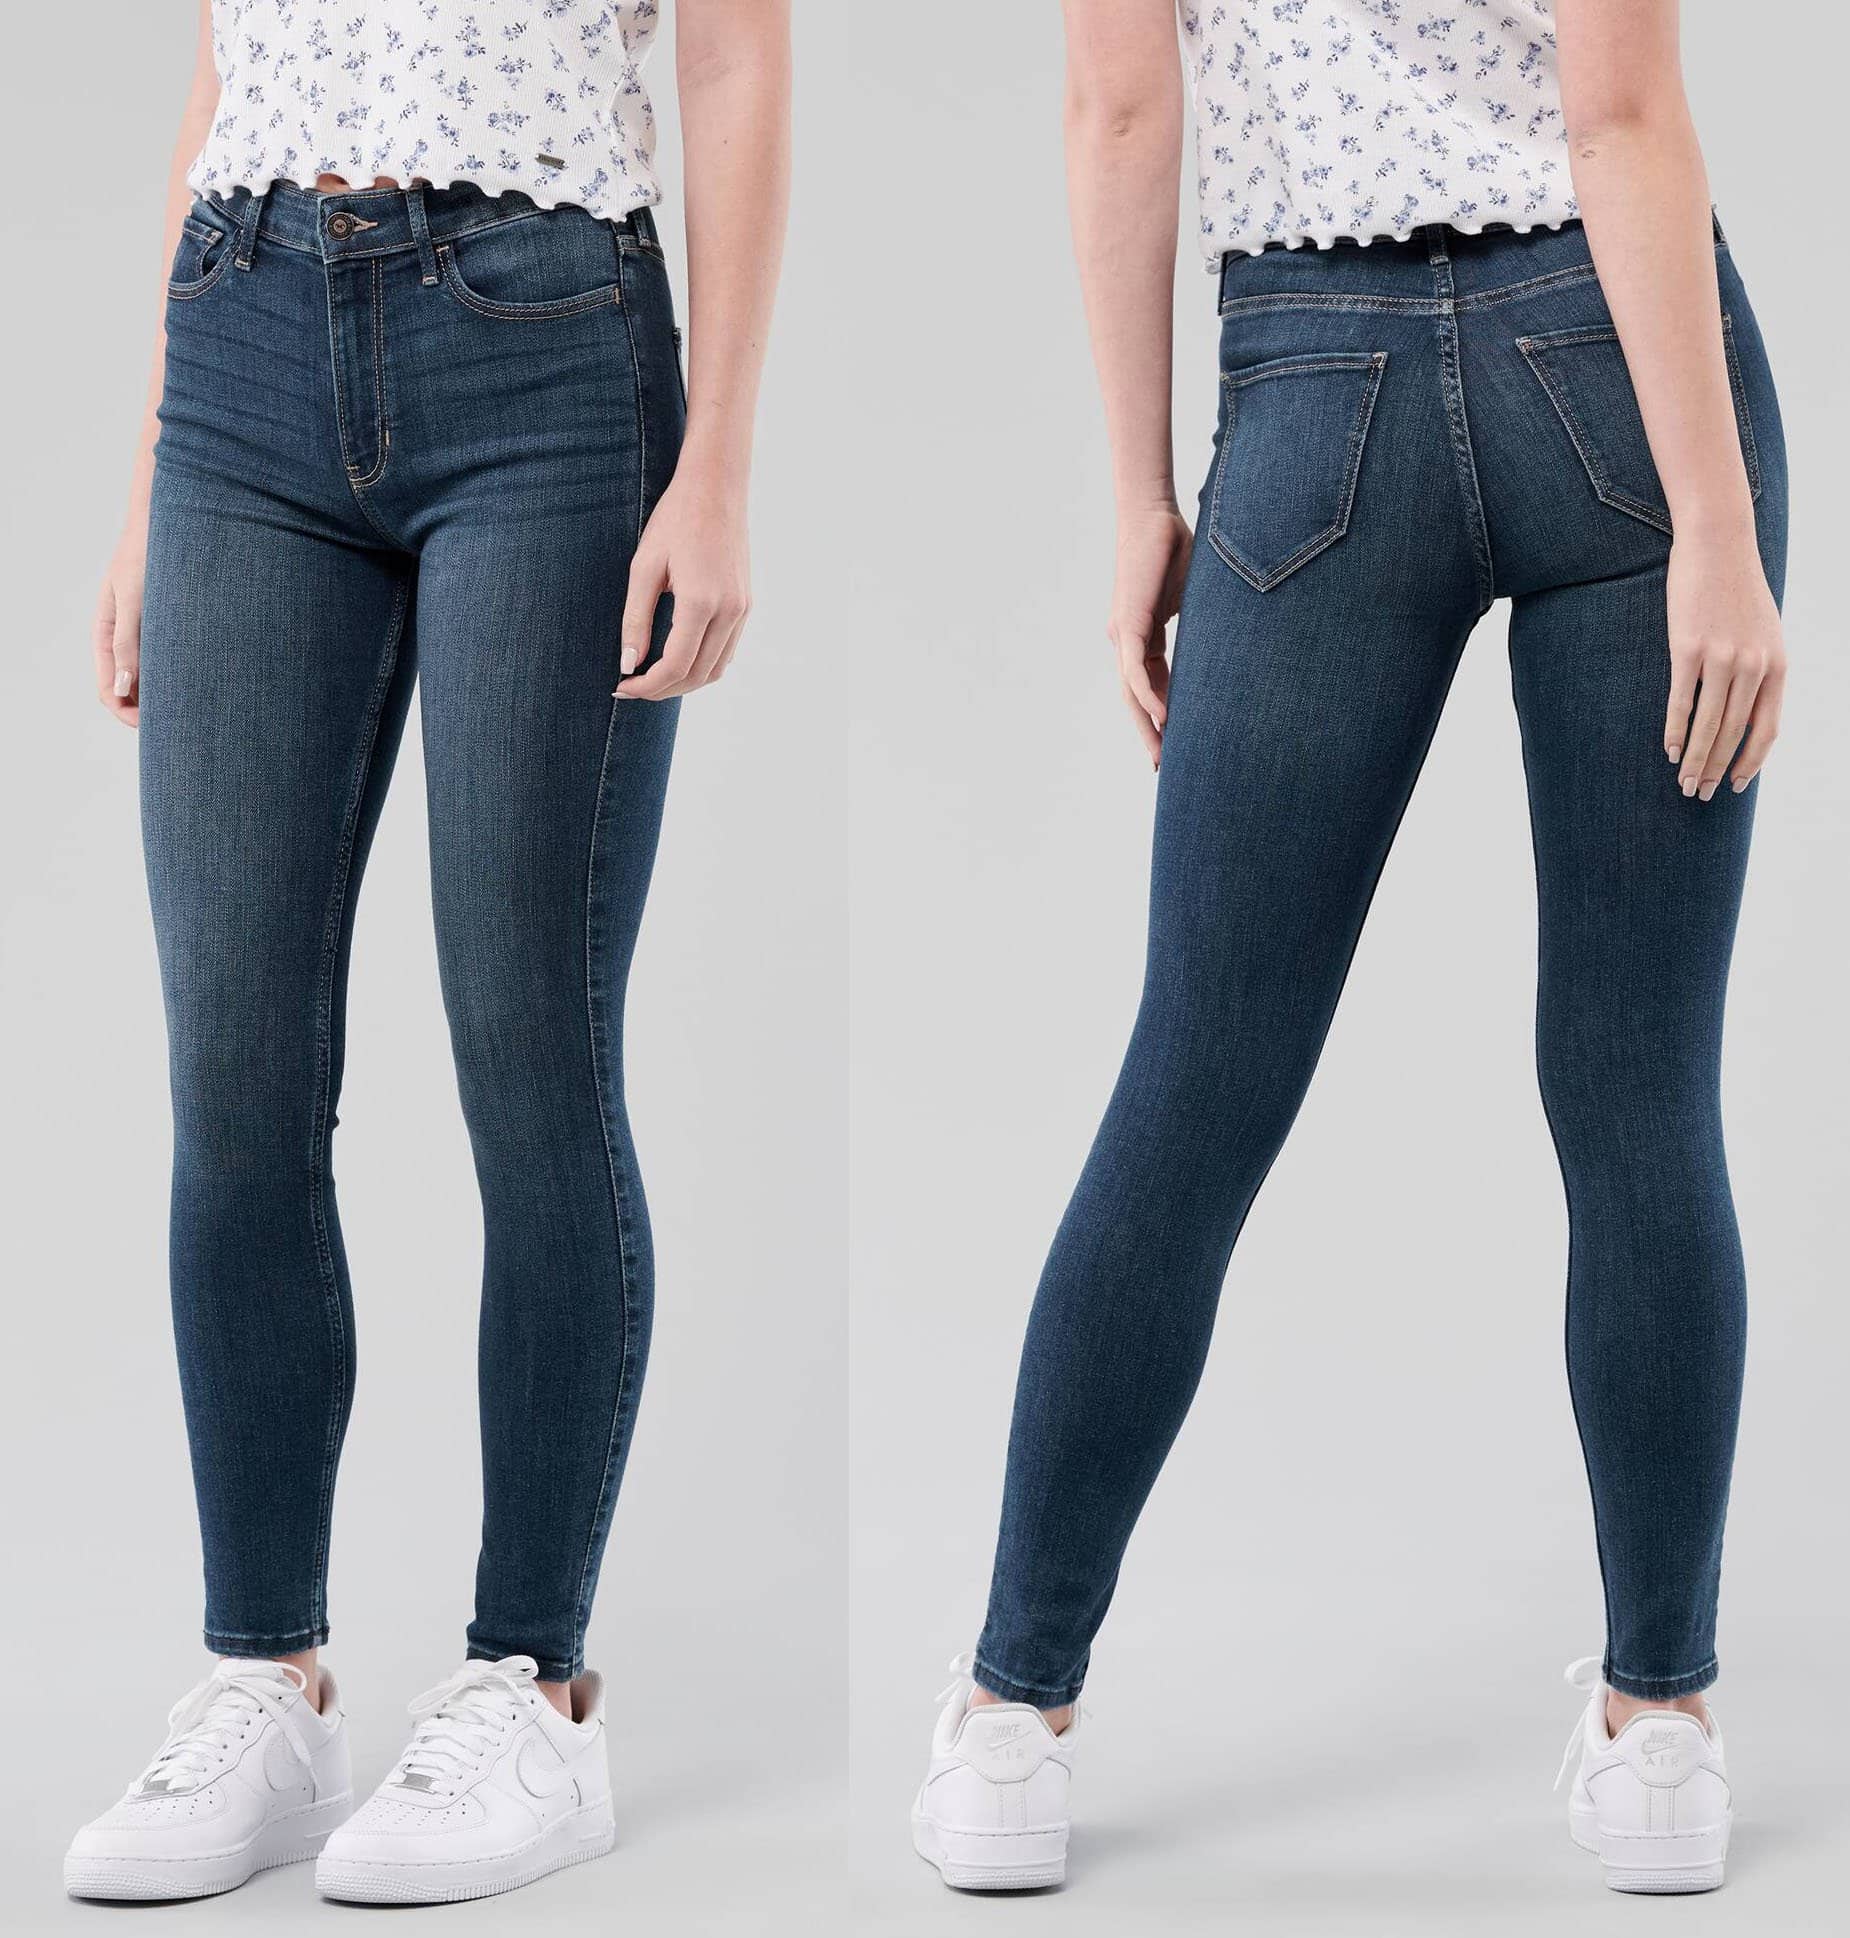 Designed in Hollister's signature slim fit made from Soft Stretch Denim with super skinny leg opening